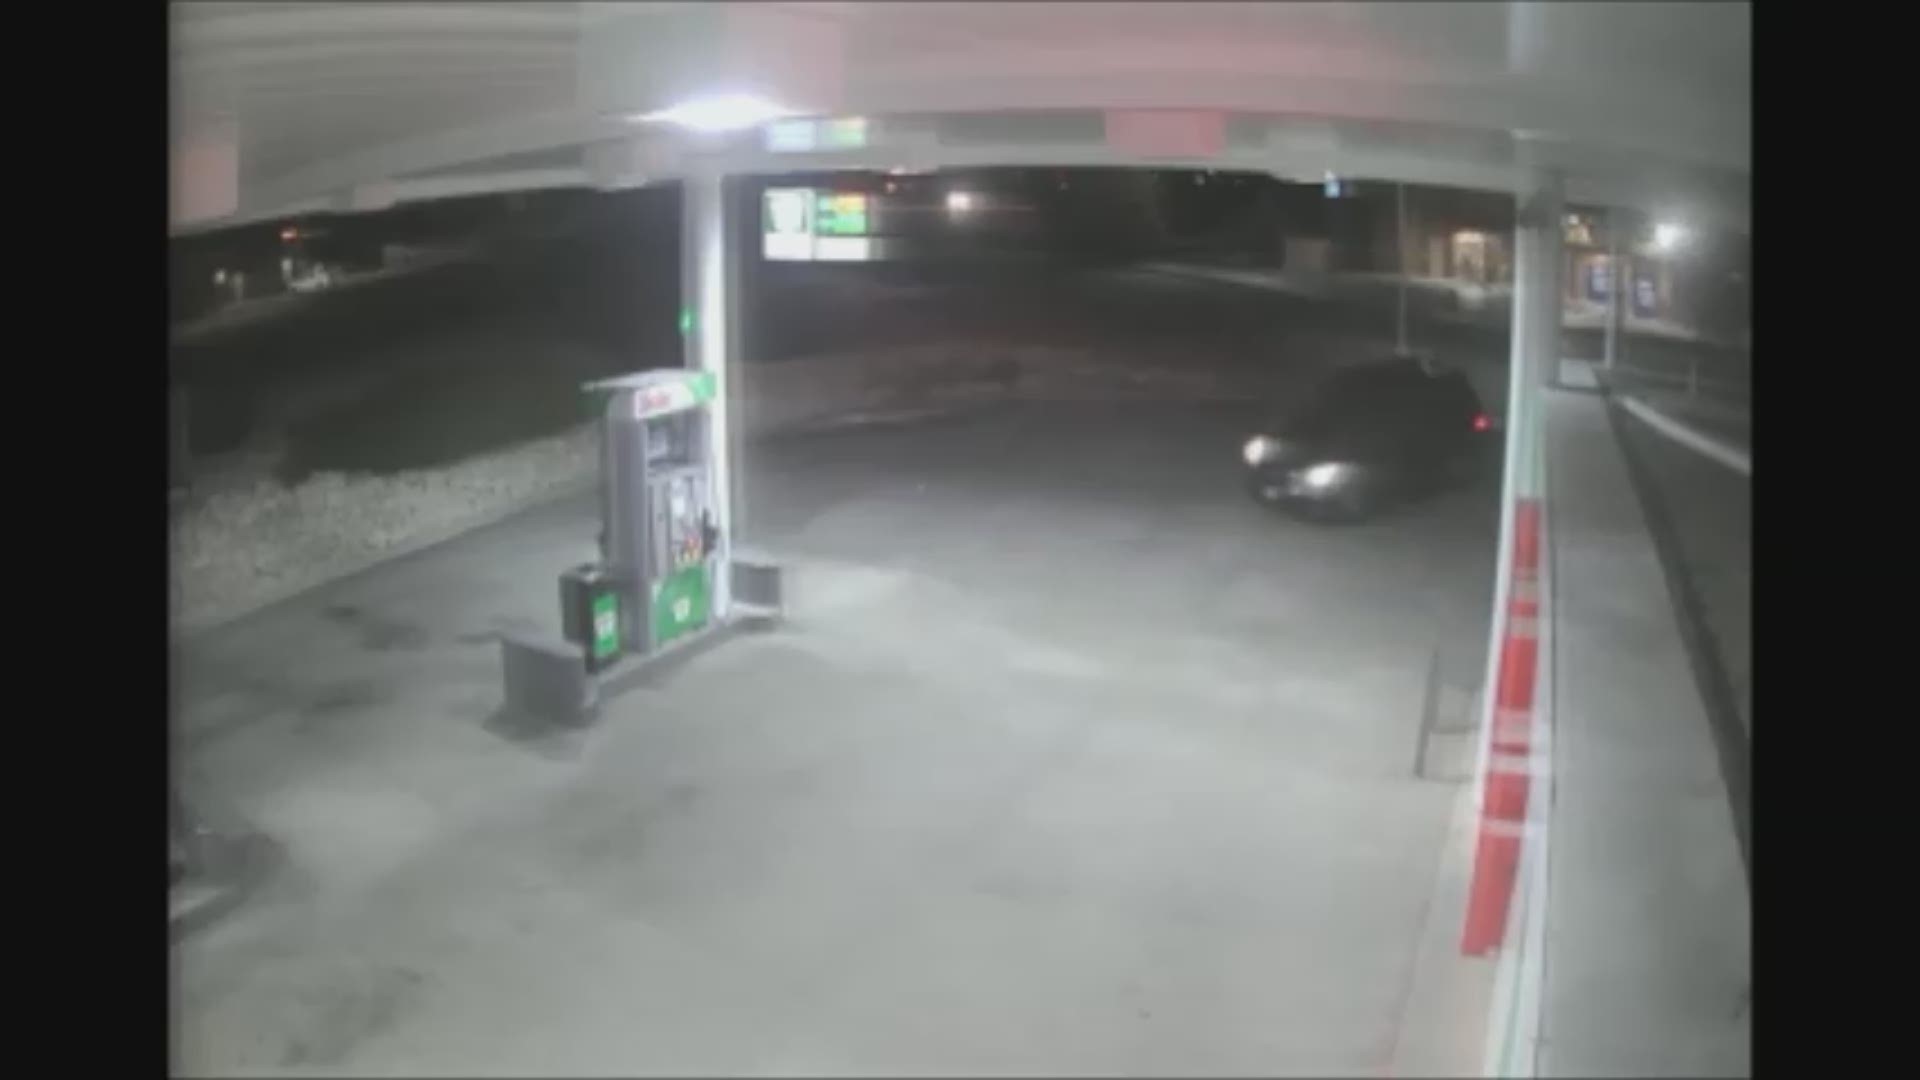 Surveillance video shows a 39-year-old burglary suspect crashing into a gas station and a bank in Littleton early Thursday.